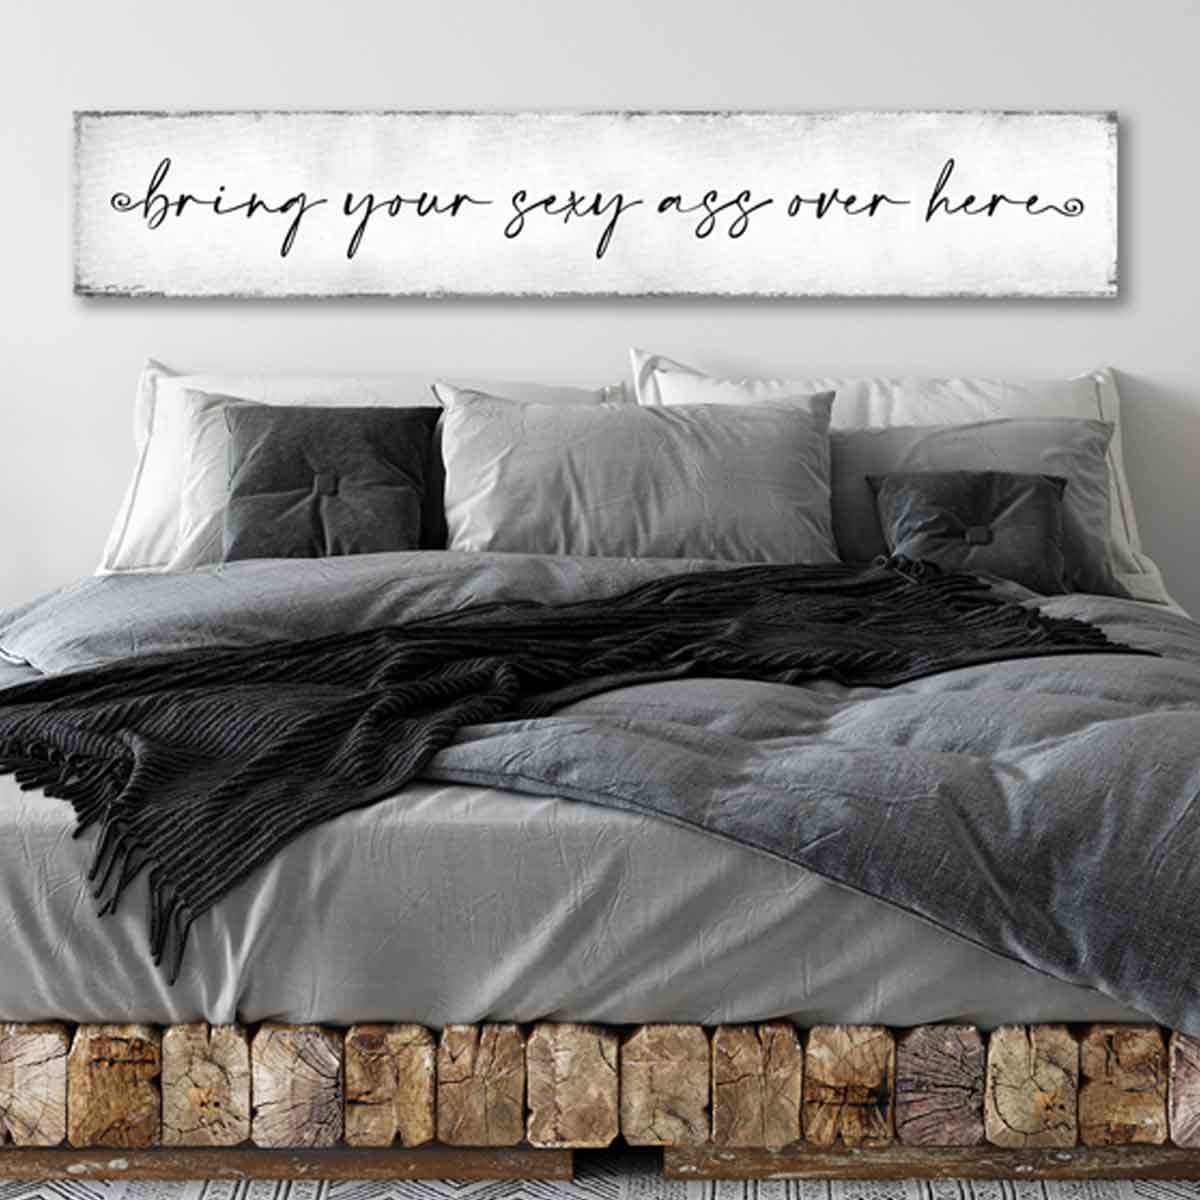 Bring Your Sexy Ass Over Here on White Distressed Background 